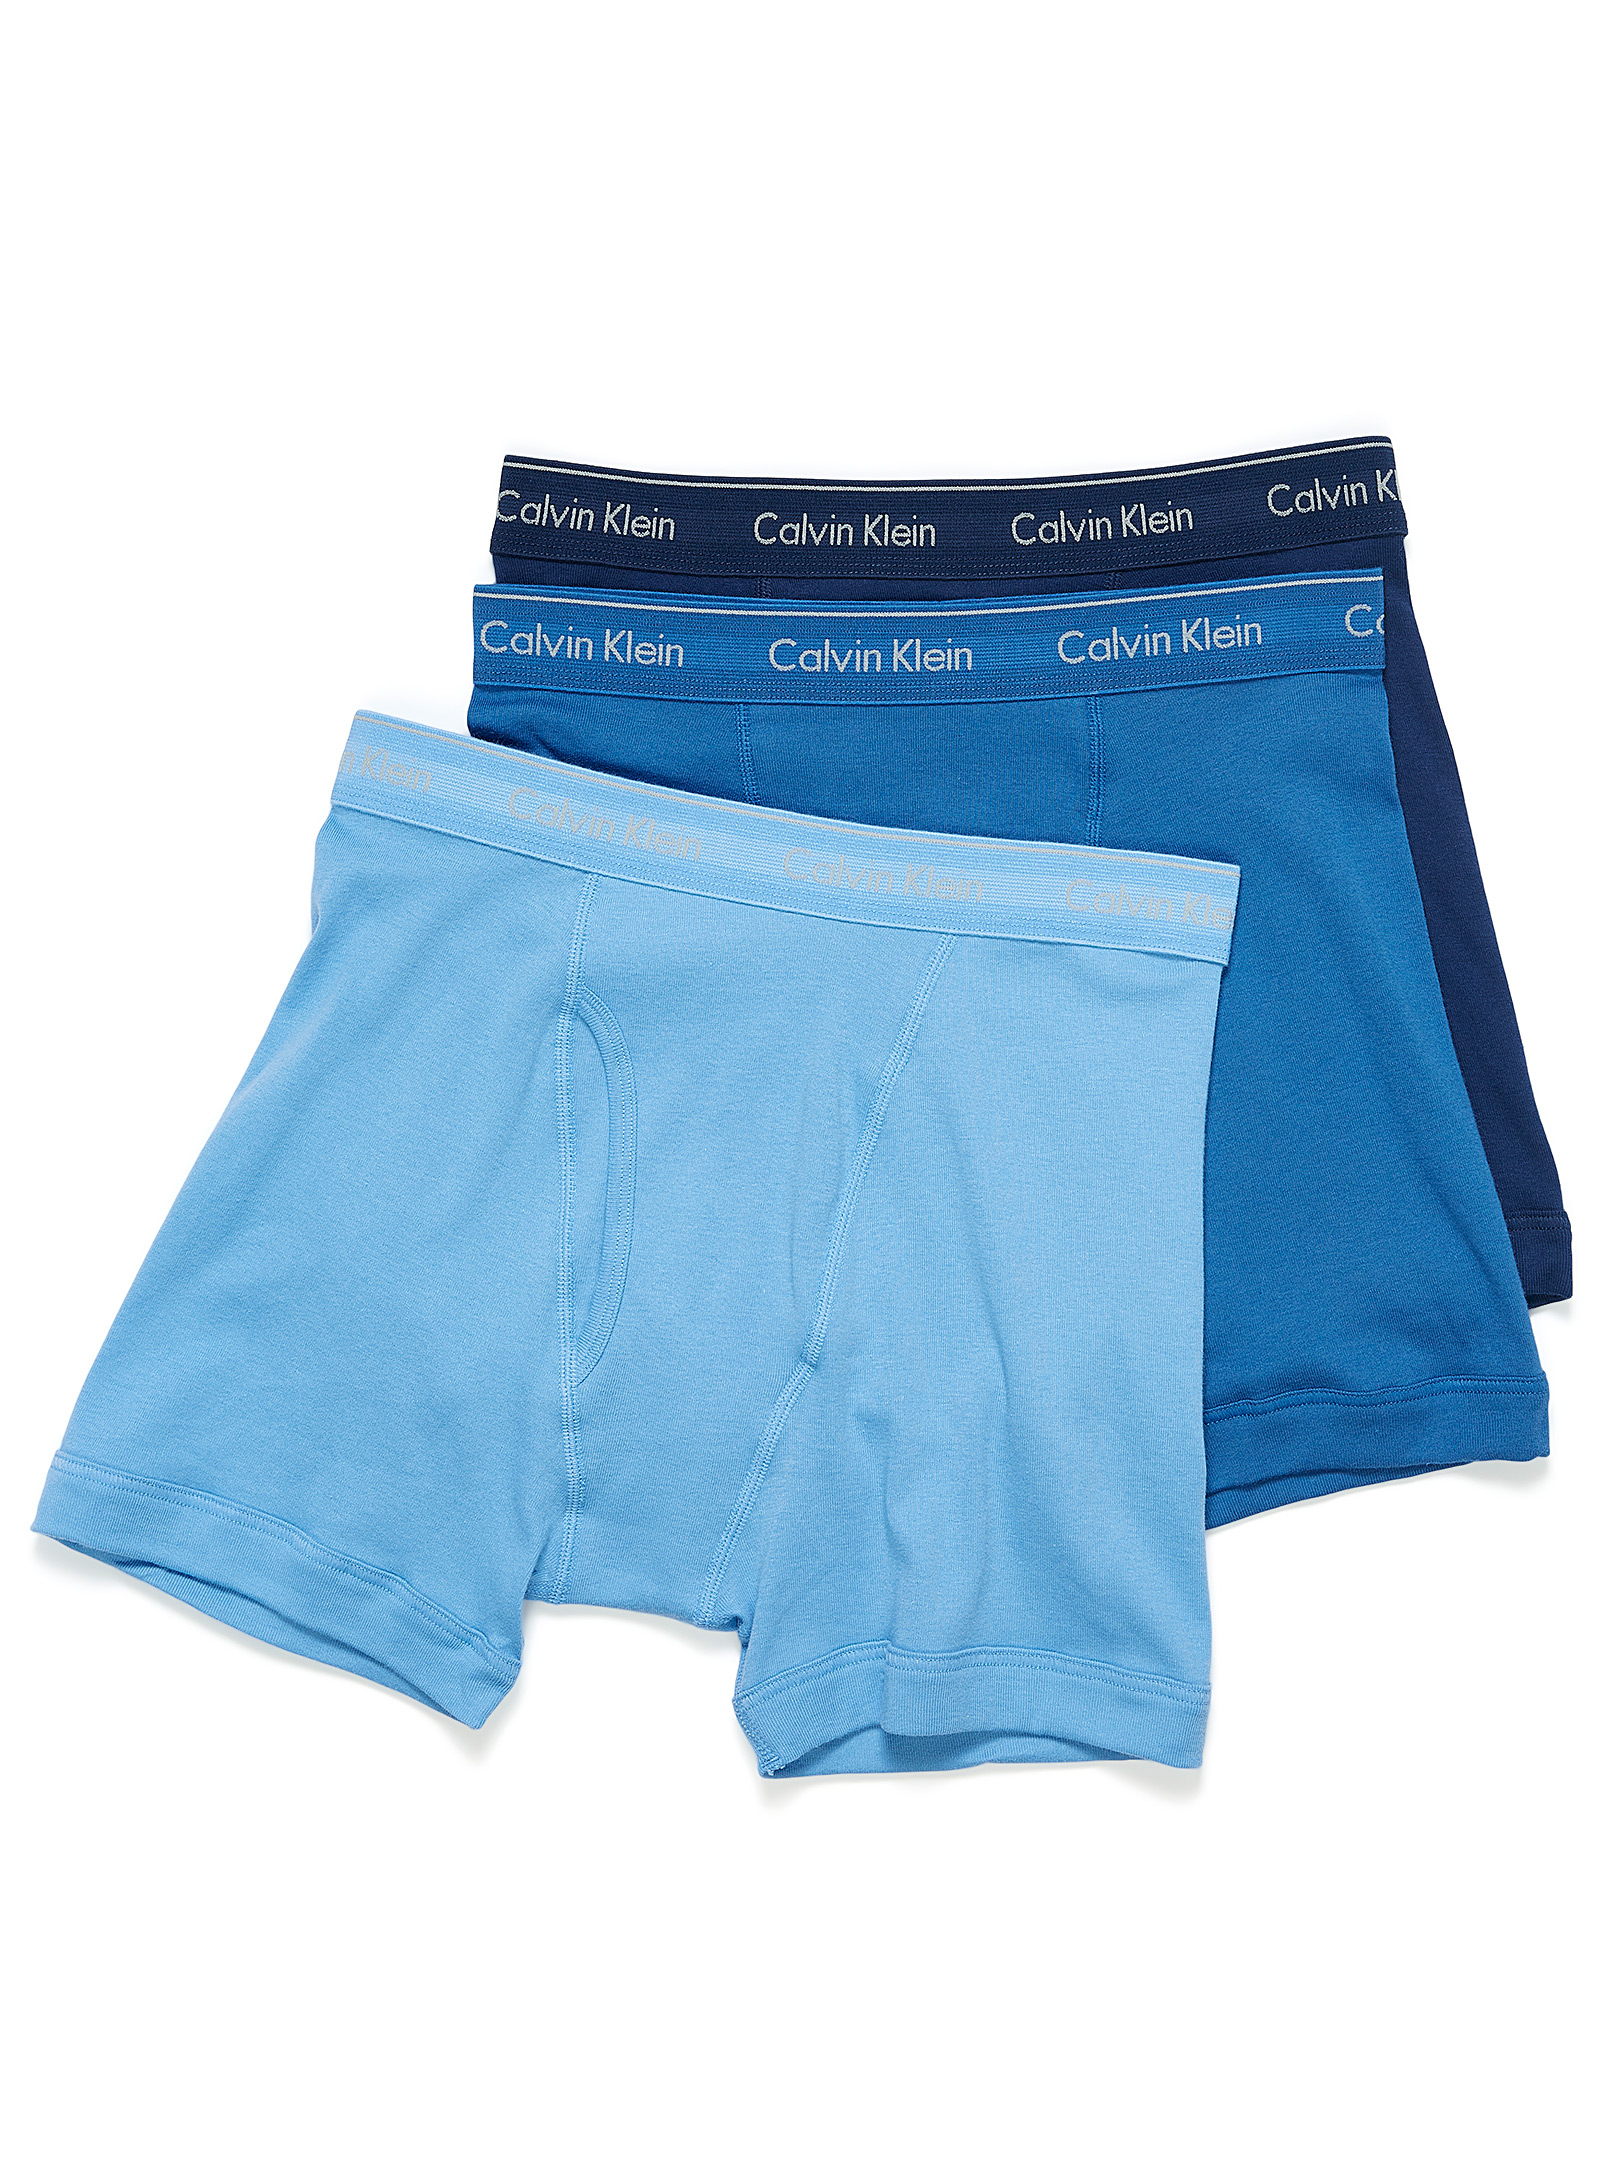 Calvin Klein Classic Boxer Briefs 3-pack In Patterned Blue